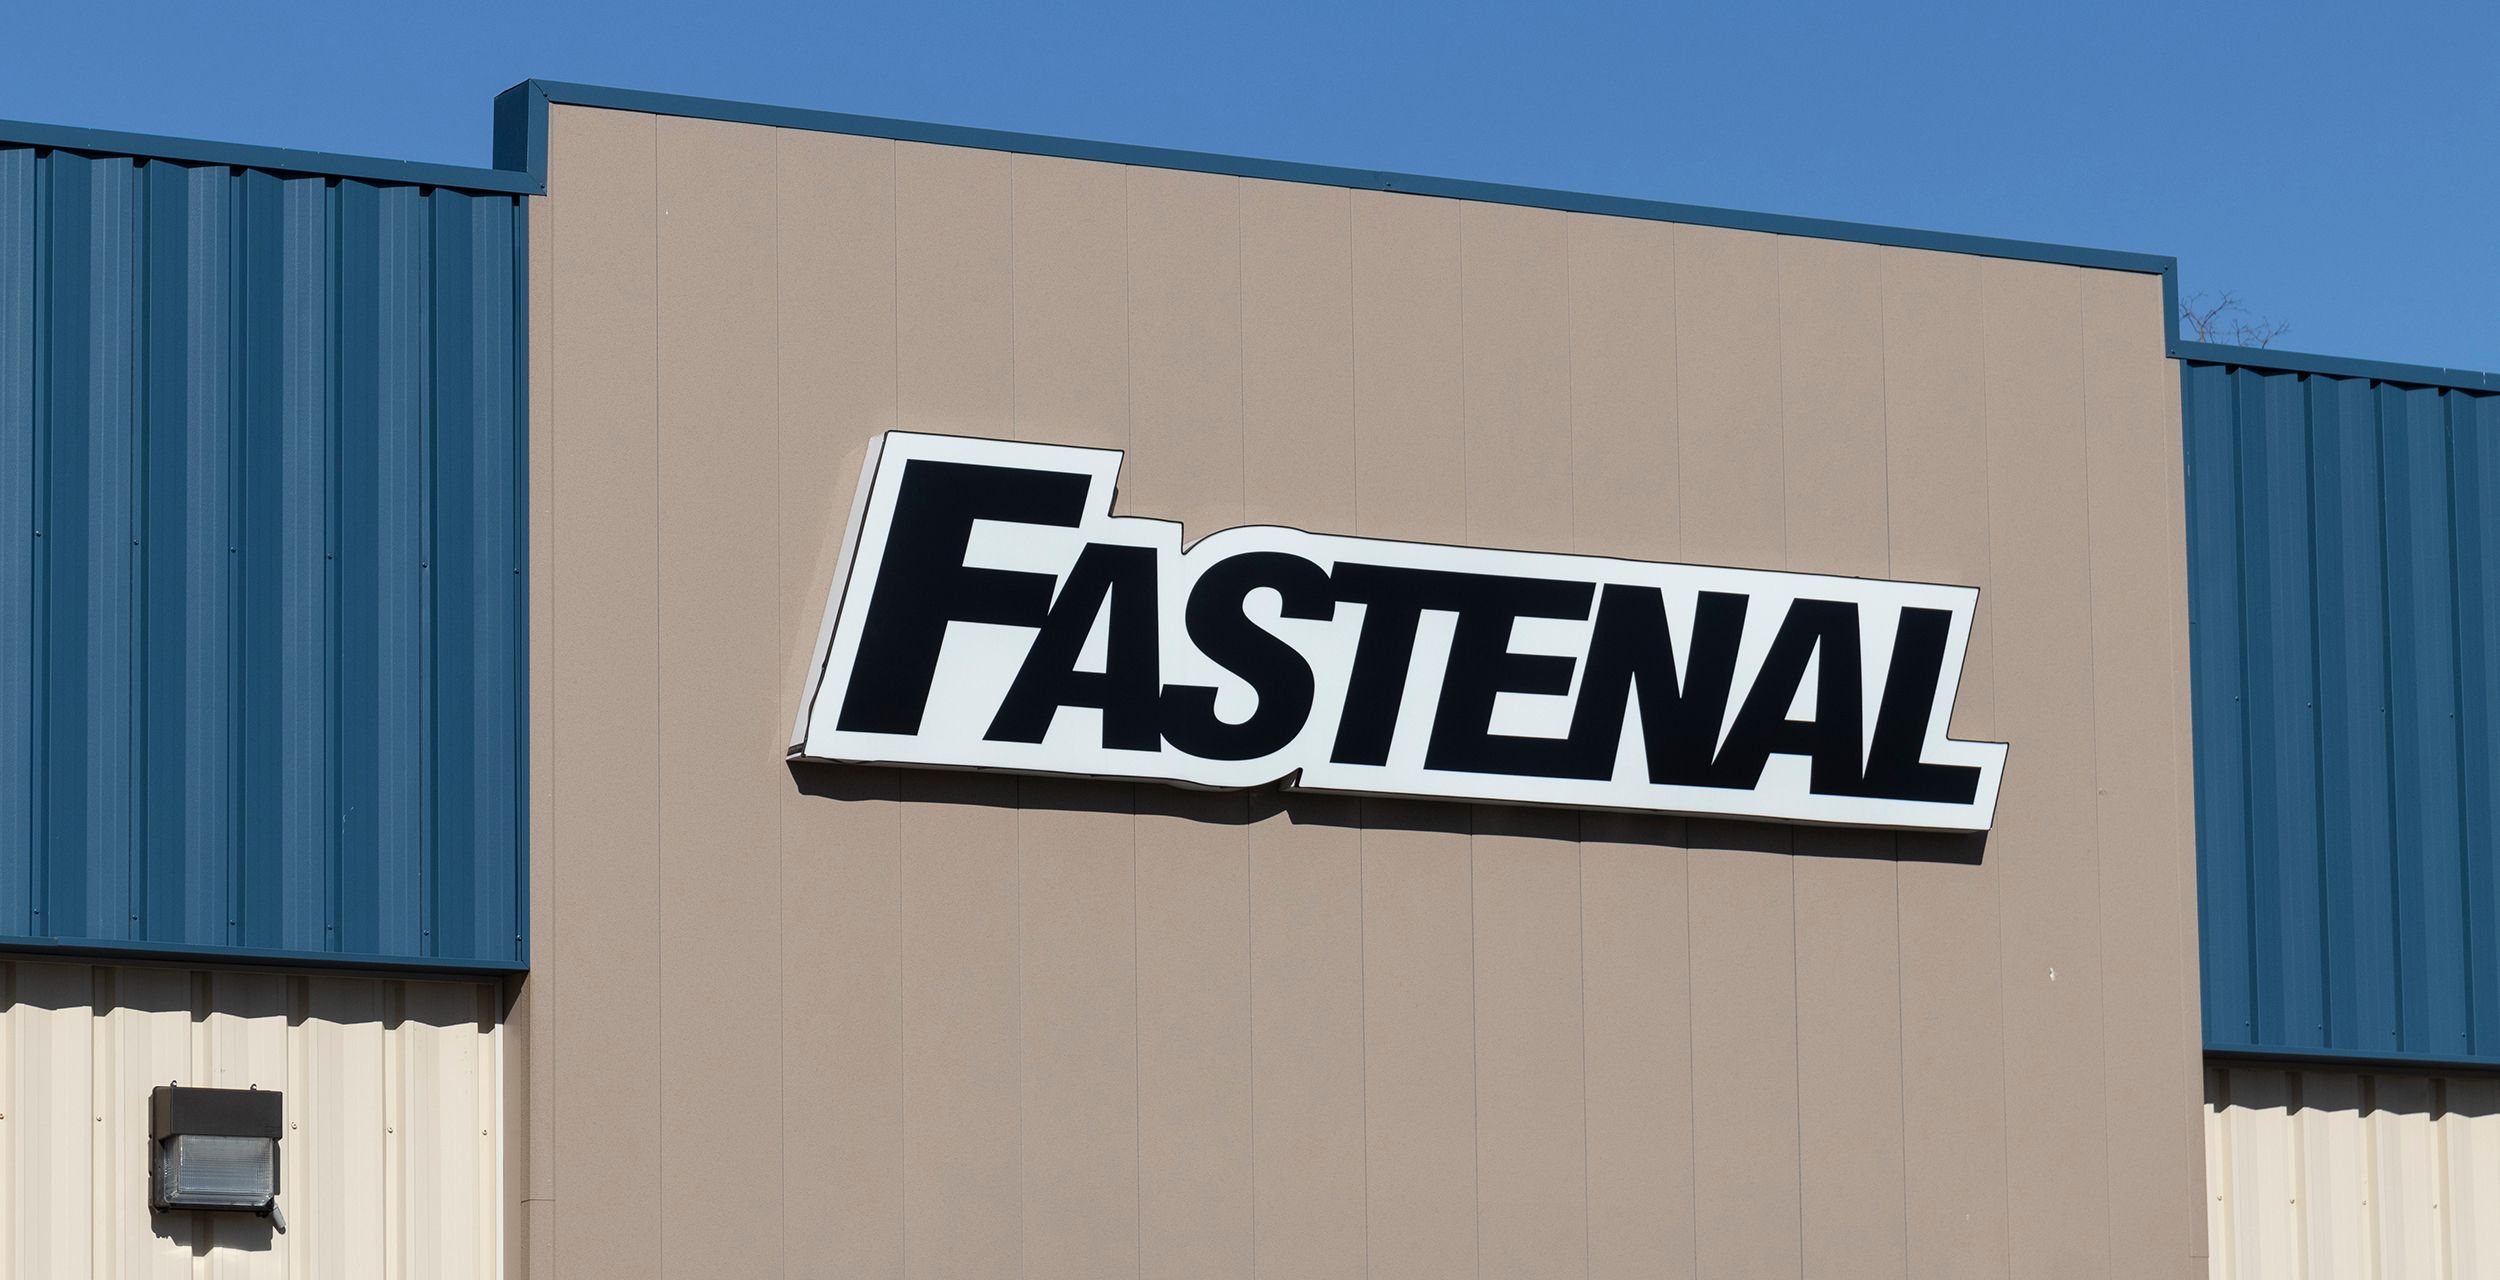 Michigan City - Circa April 2021: Fastenal industrial products and services distributor. Fastenal resells industrial, safety, and construction supplies.